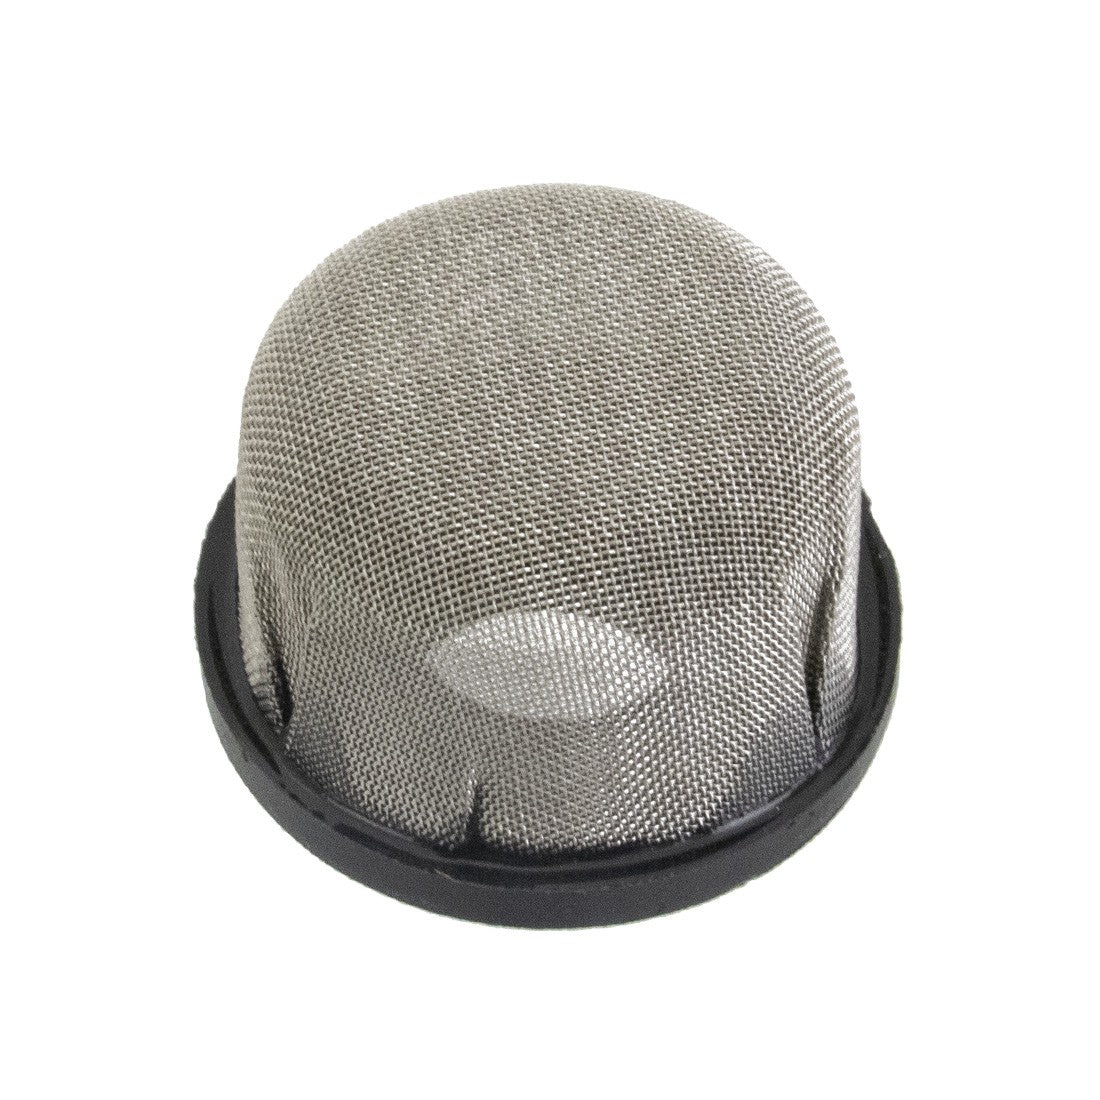 X-Jet Ball Strainer Tank Screen - 1/2 Inch - Bottom Angle View